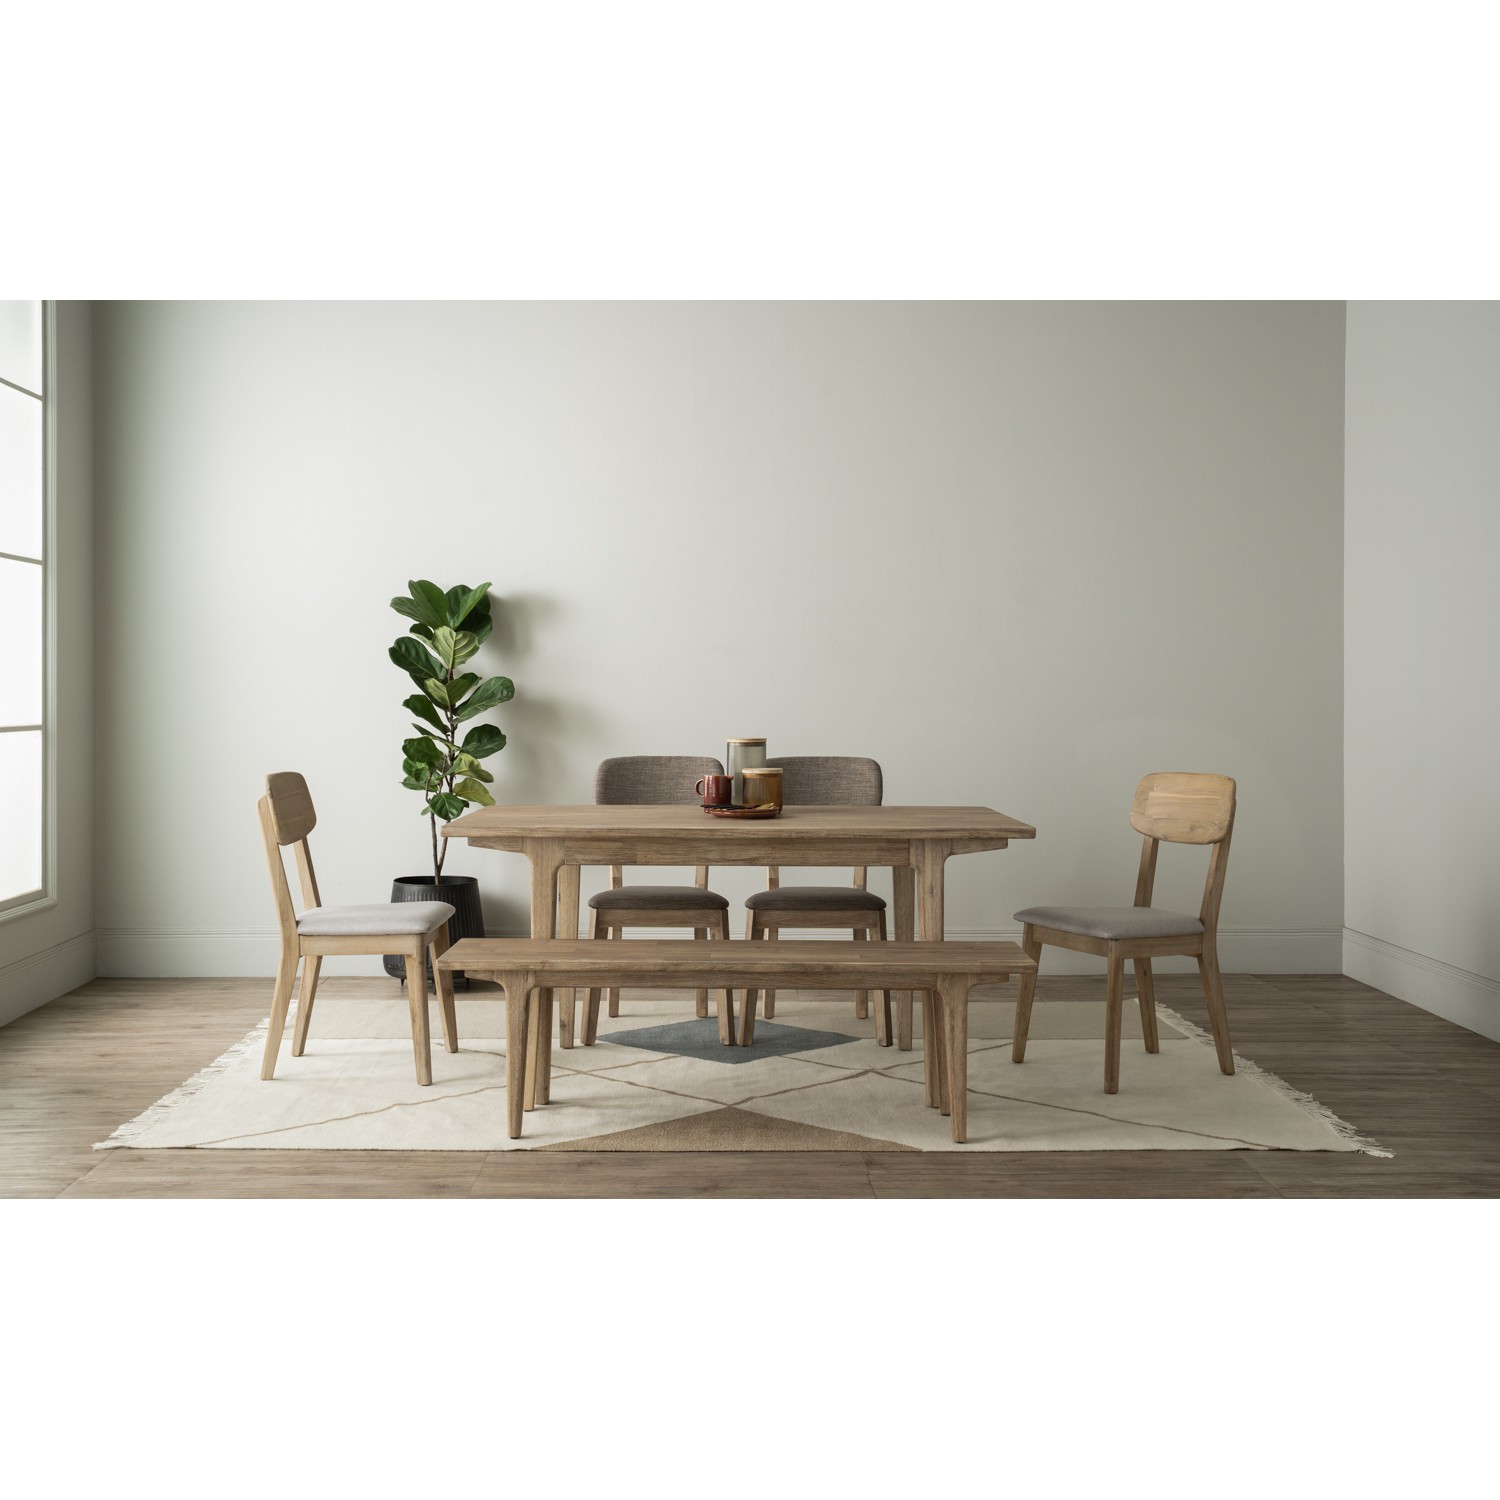 MOISE DINING CHAIR 1808 (#)